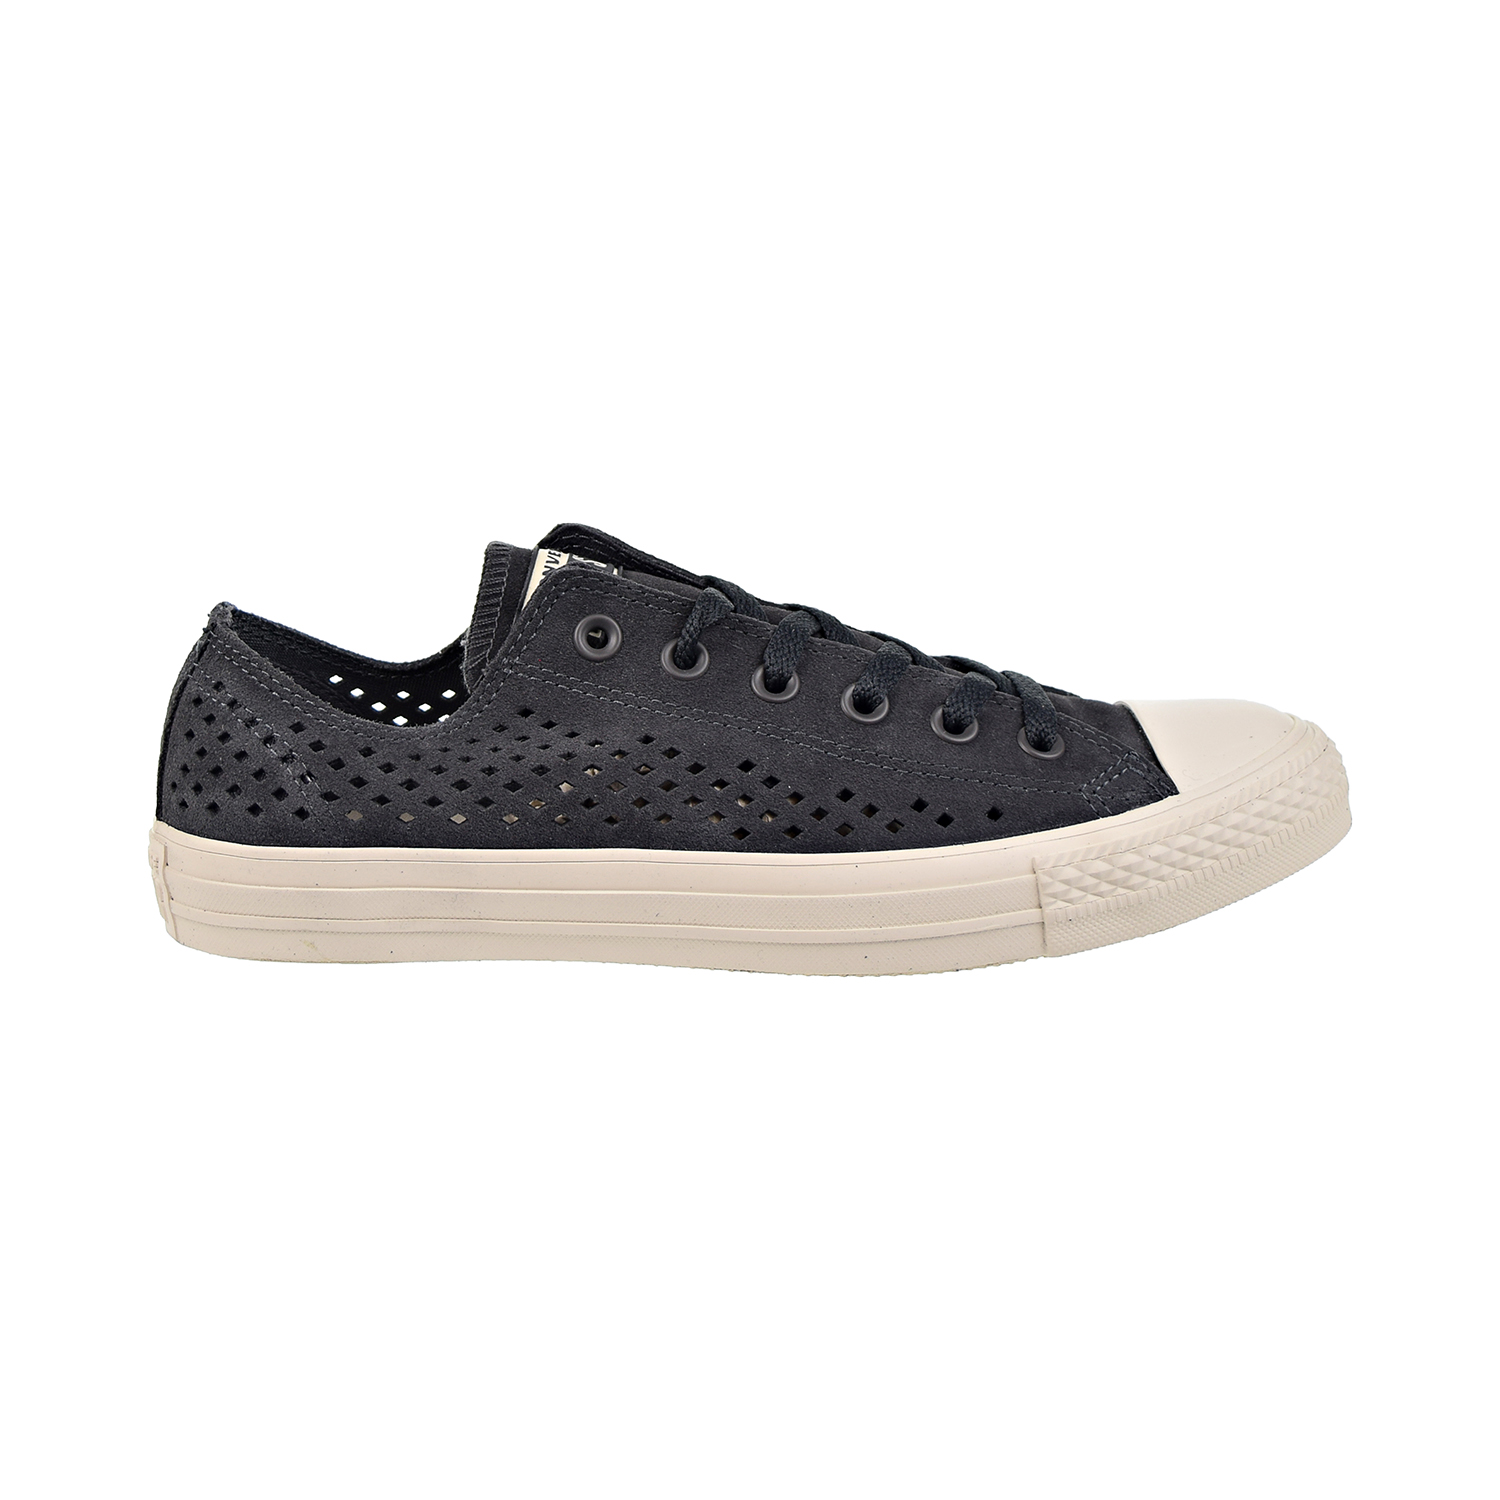 Converse Chuck Taylor All Star Ox Men's Shoes Perforated Almost Black  160464C | eBay